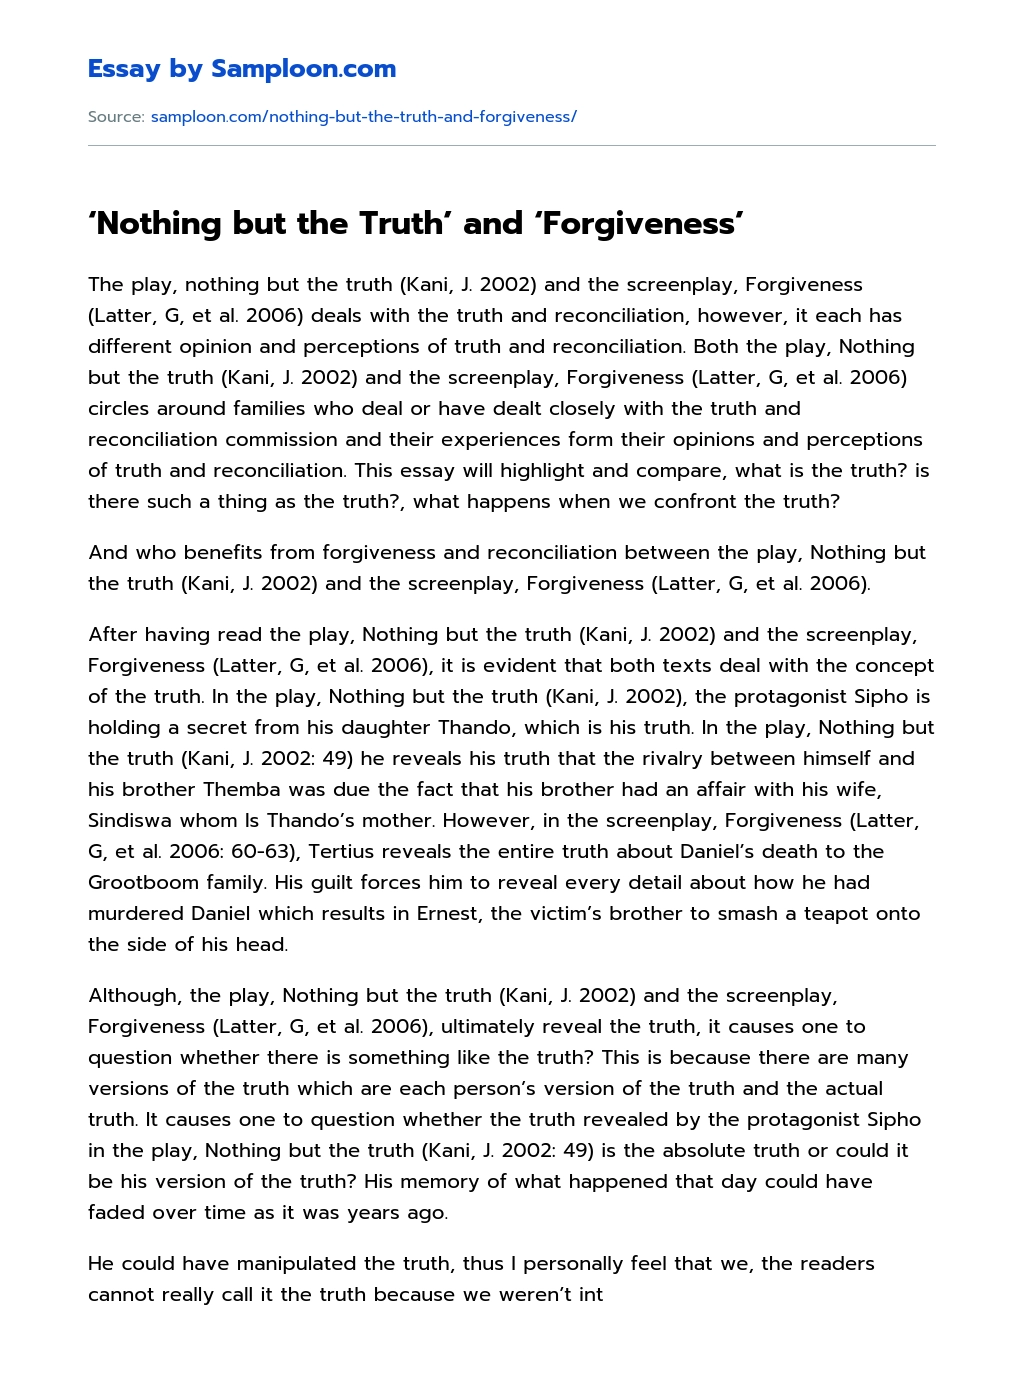 Nothing but the Truth’ and ‘Forgiveness’ Analytical Essay essay